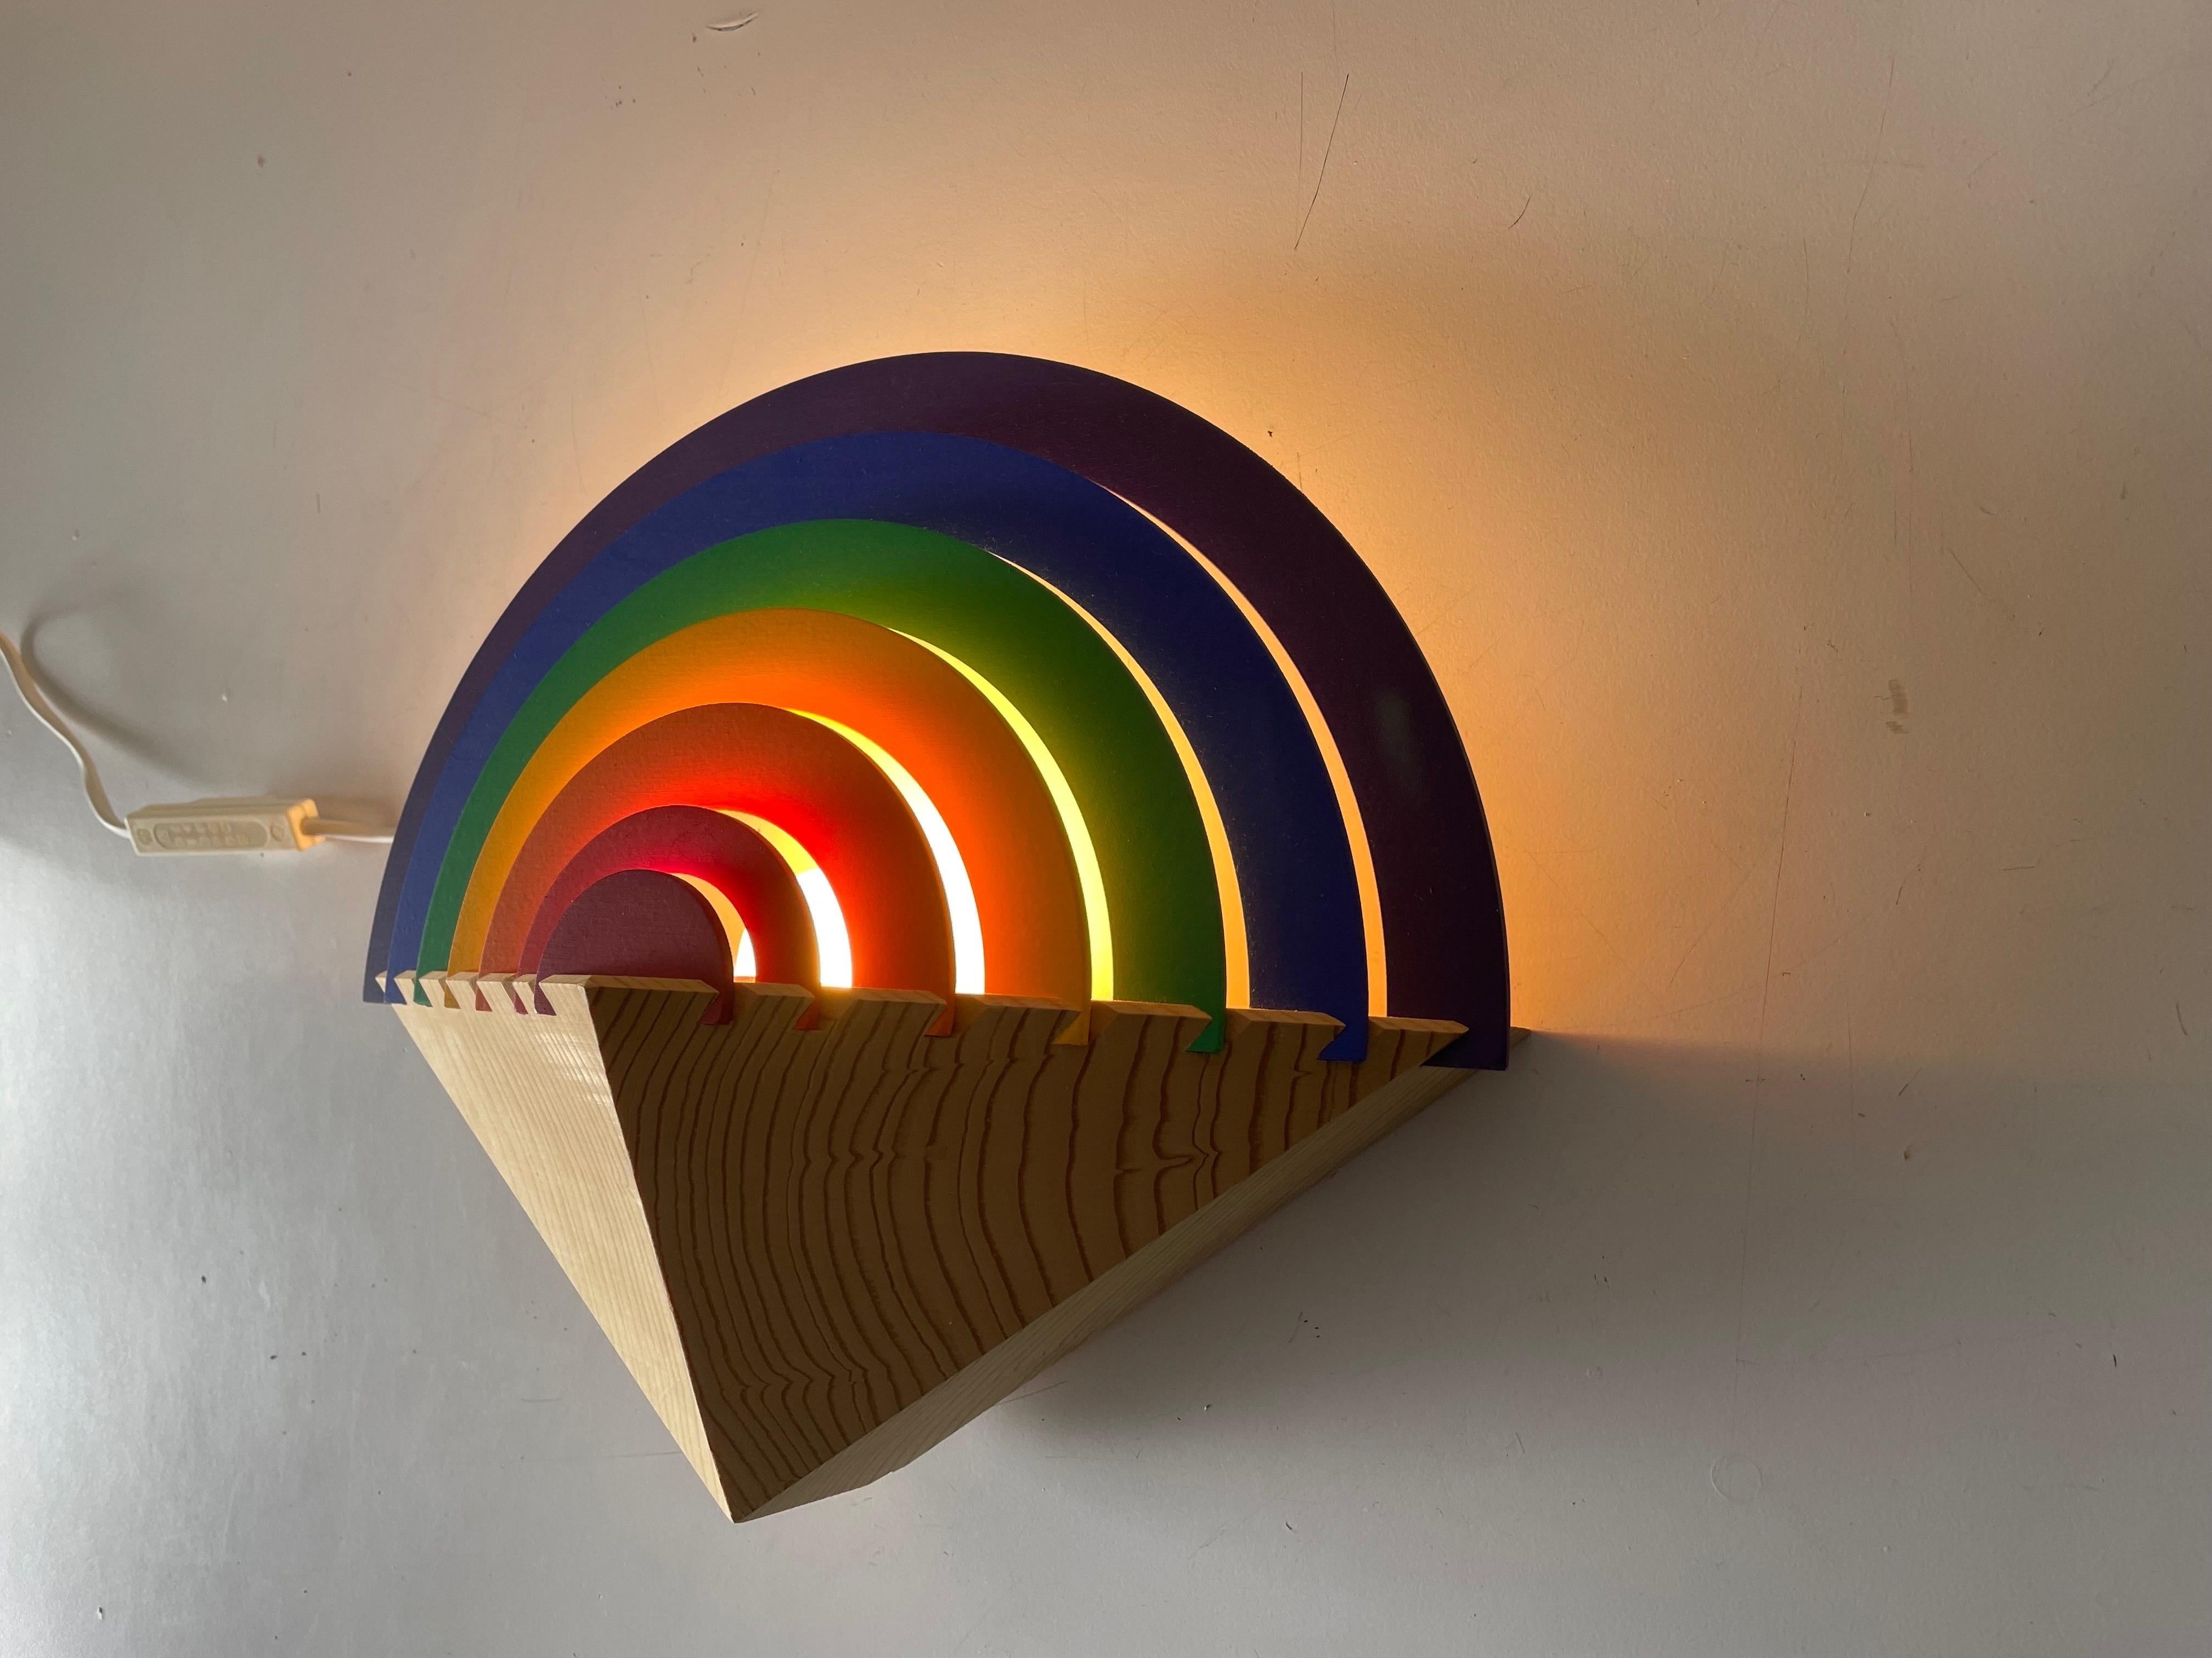 Rainbow design Wood Night Lamp by Kiener Zürich, in Style of Memphis Group, 1980 For Sale 3